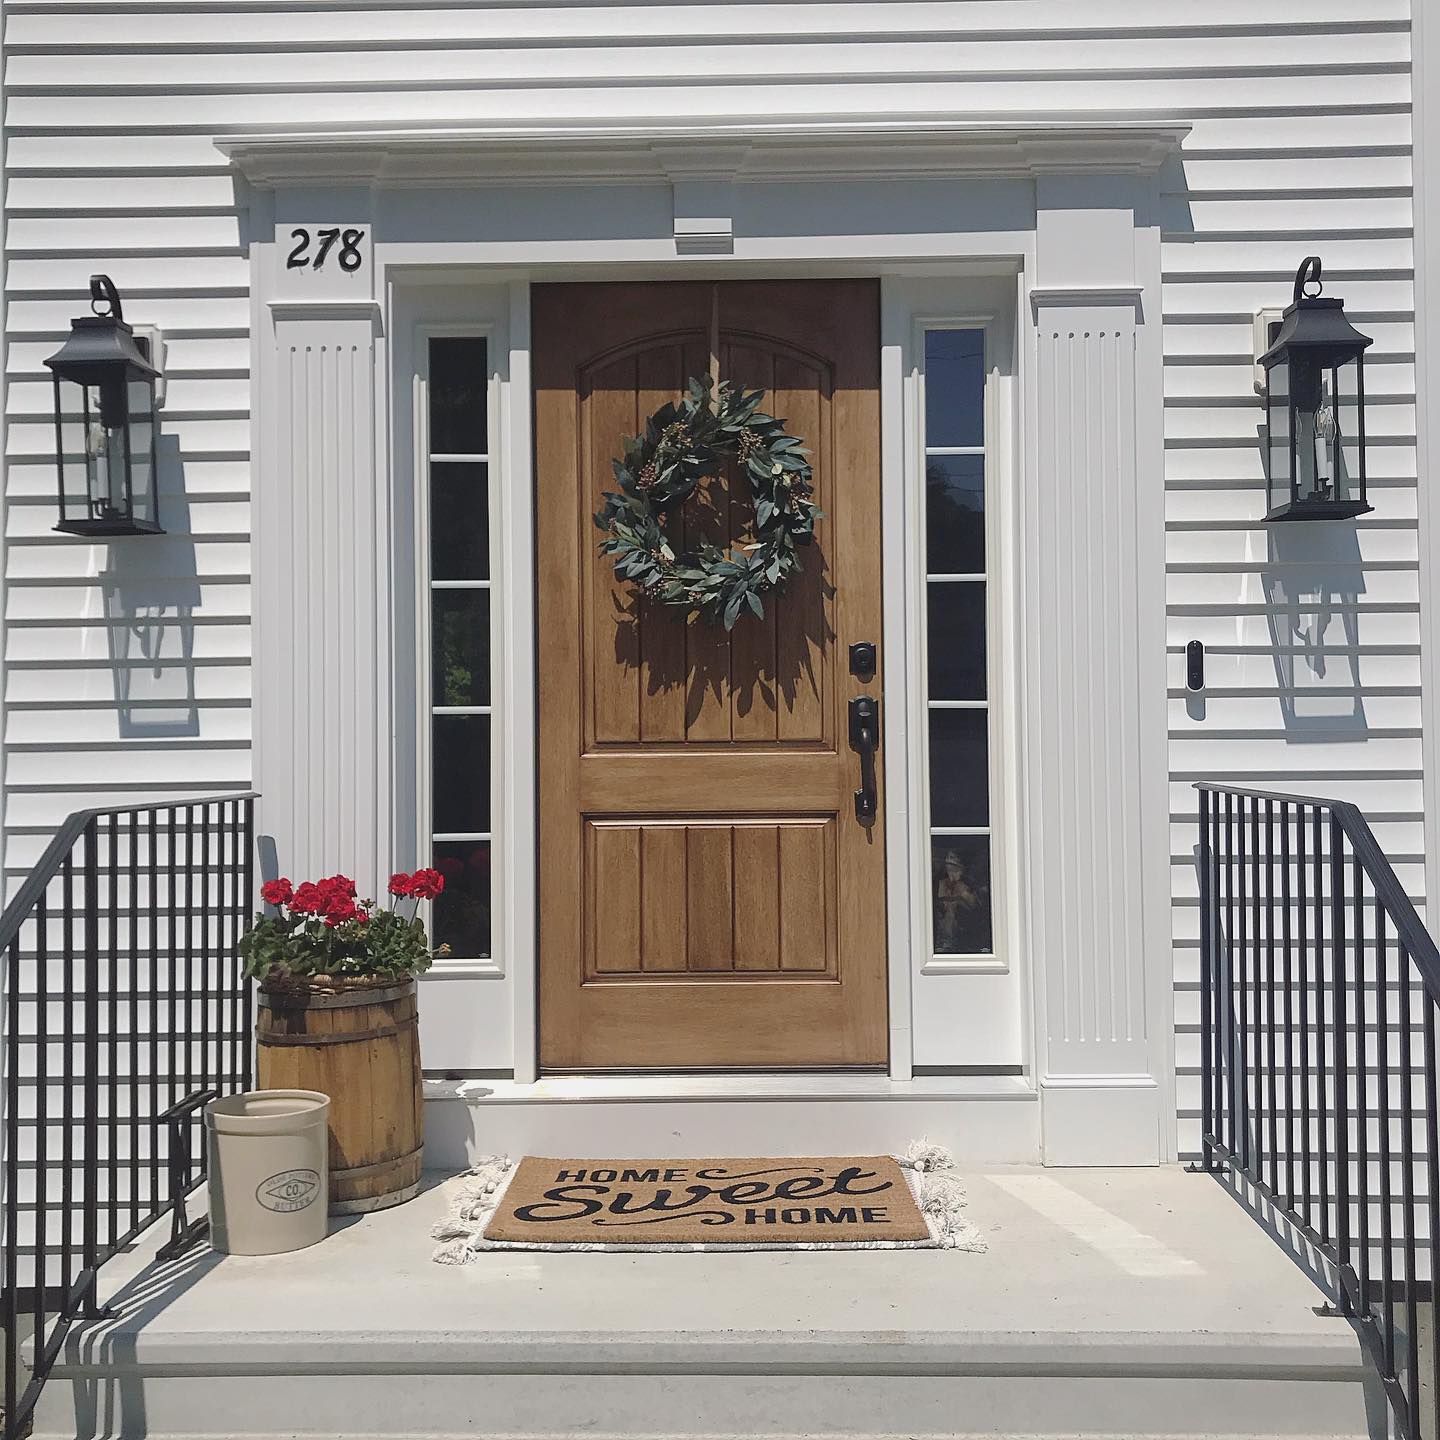 A wood entry door on a white home with a wreath hanging in the center of the door.